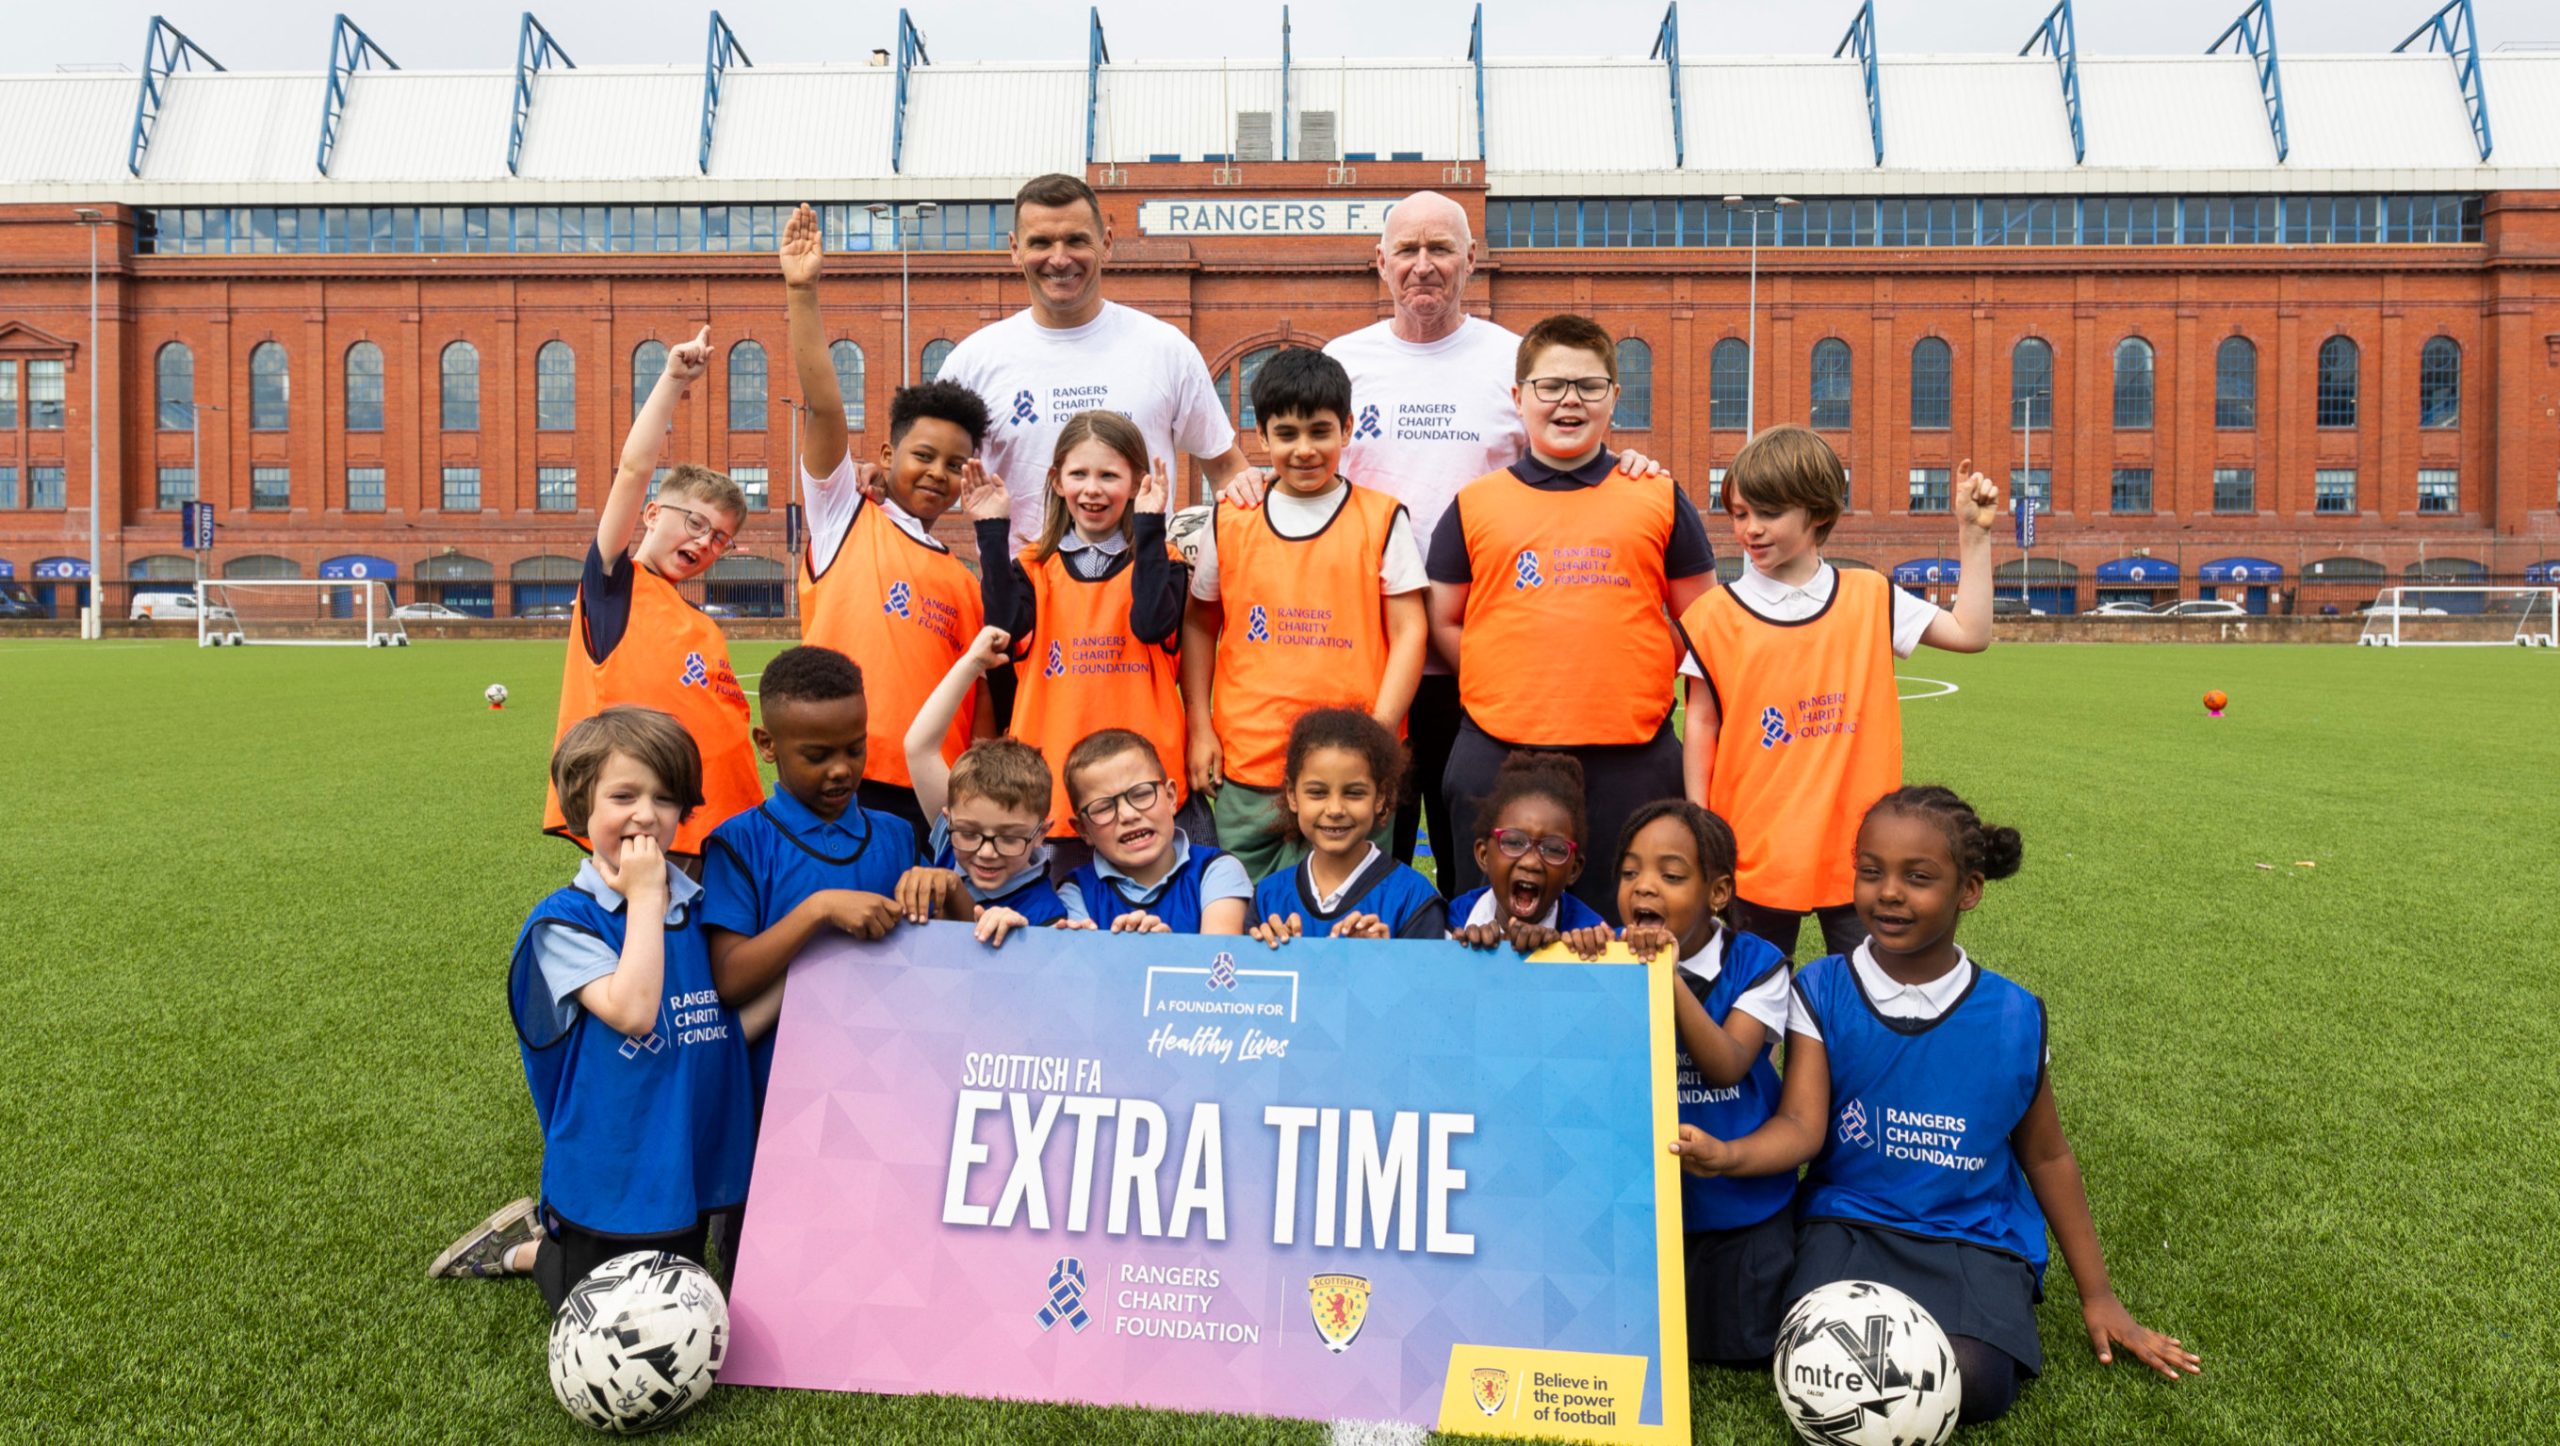 Lee McCulloch and John Brown Meet Ibrox Primary Pupils at Foundation's Extra Time Programme